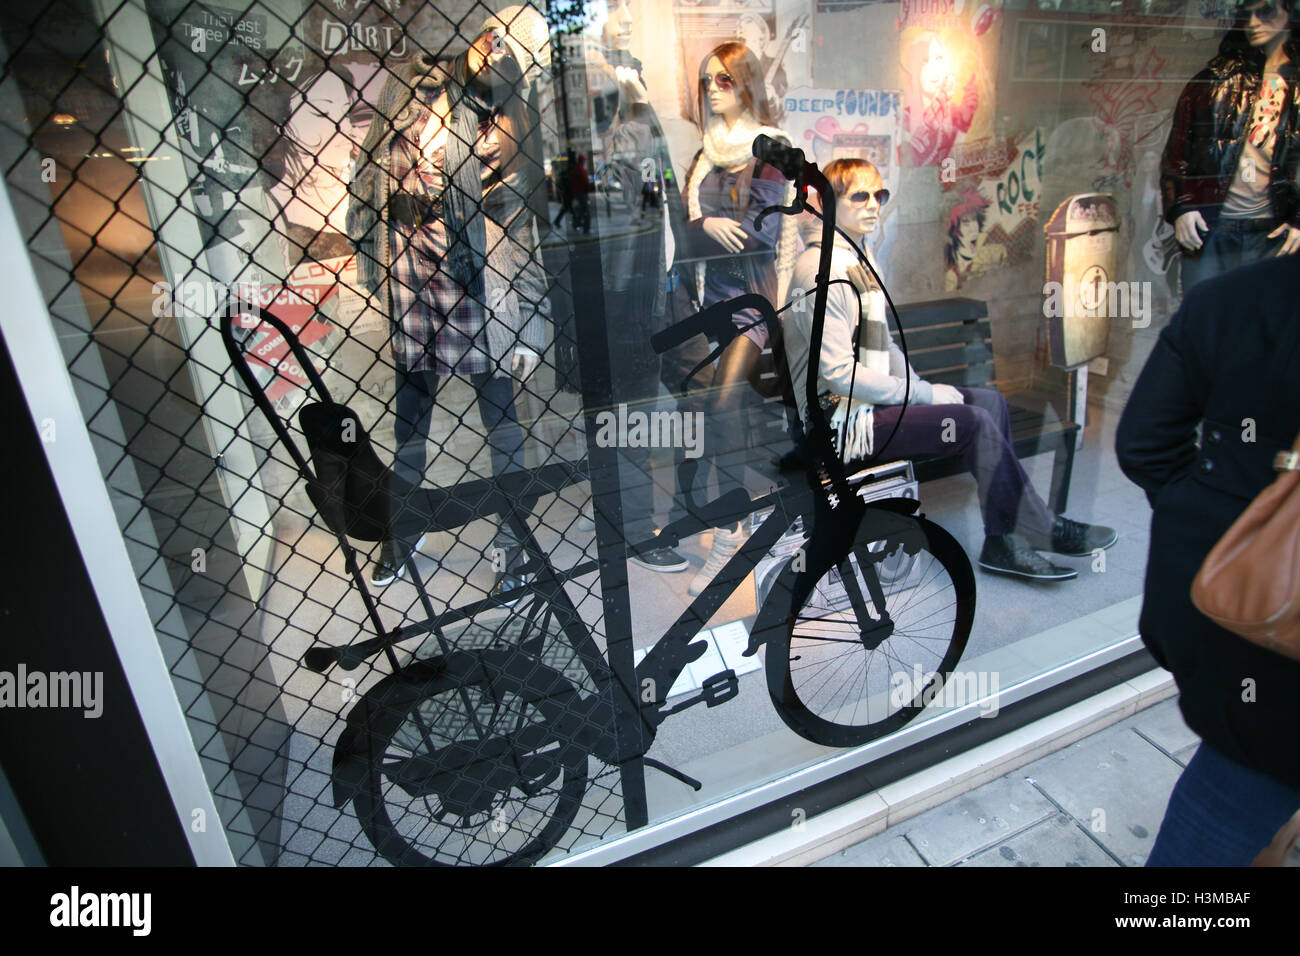 Shop Window Of Bershka Fashion Store High Resolution Stock Photography and  Images - Alamy